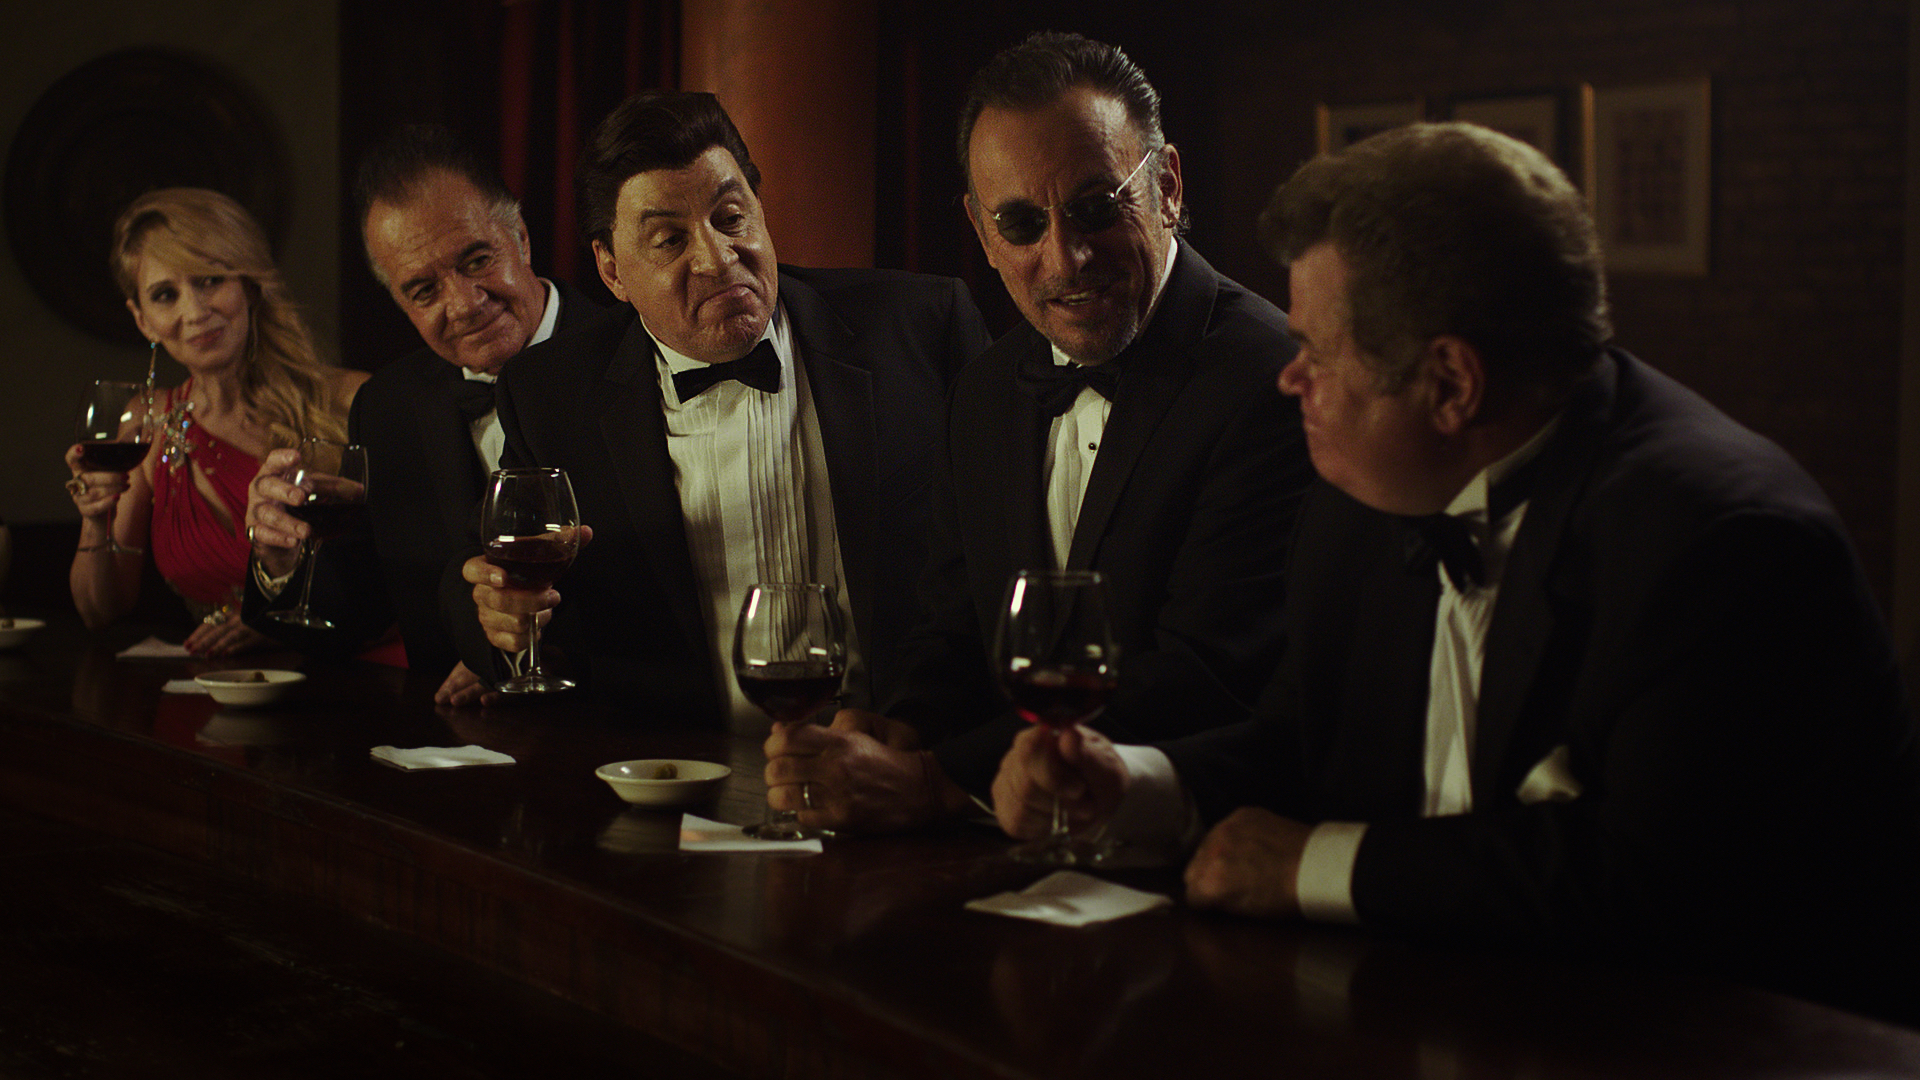 Lilyhammer Season 3. Framegrab from NY sequence